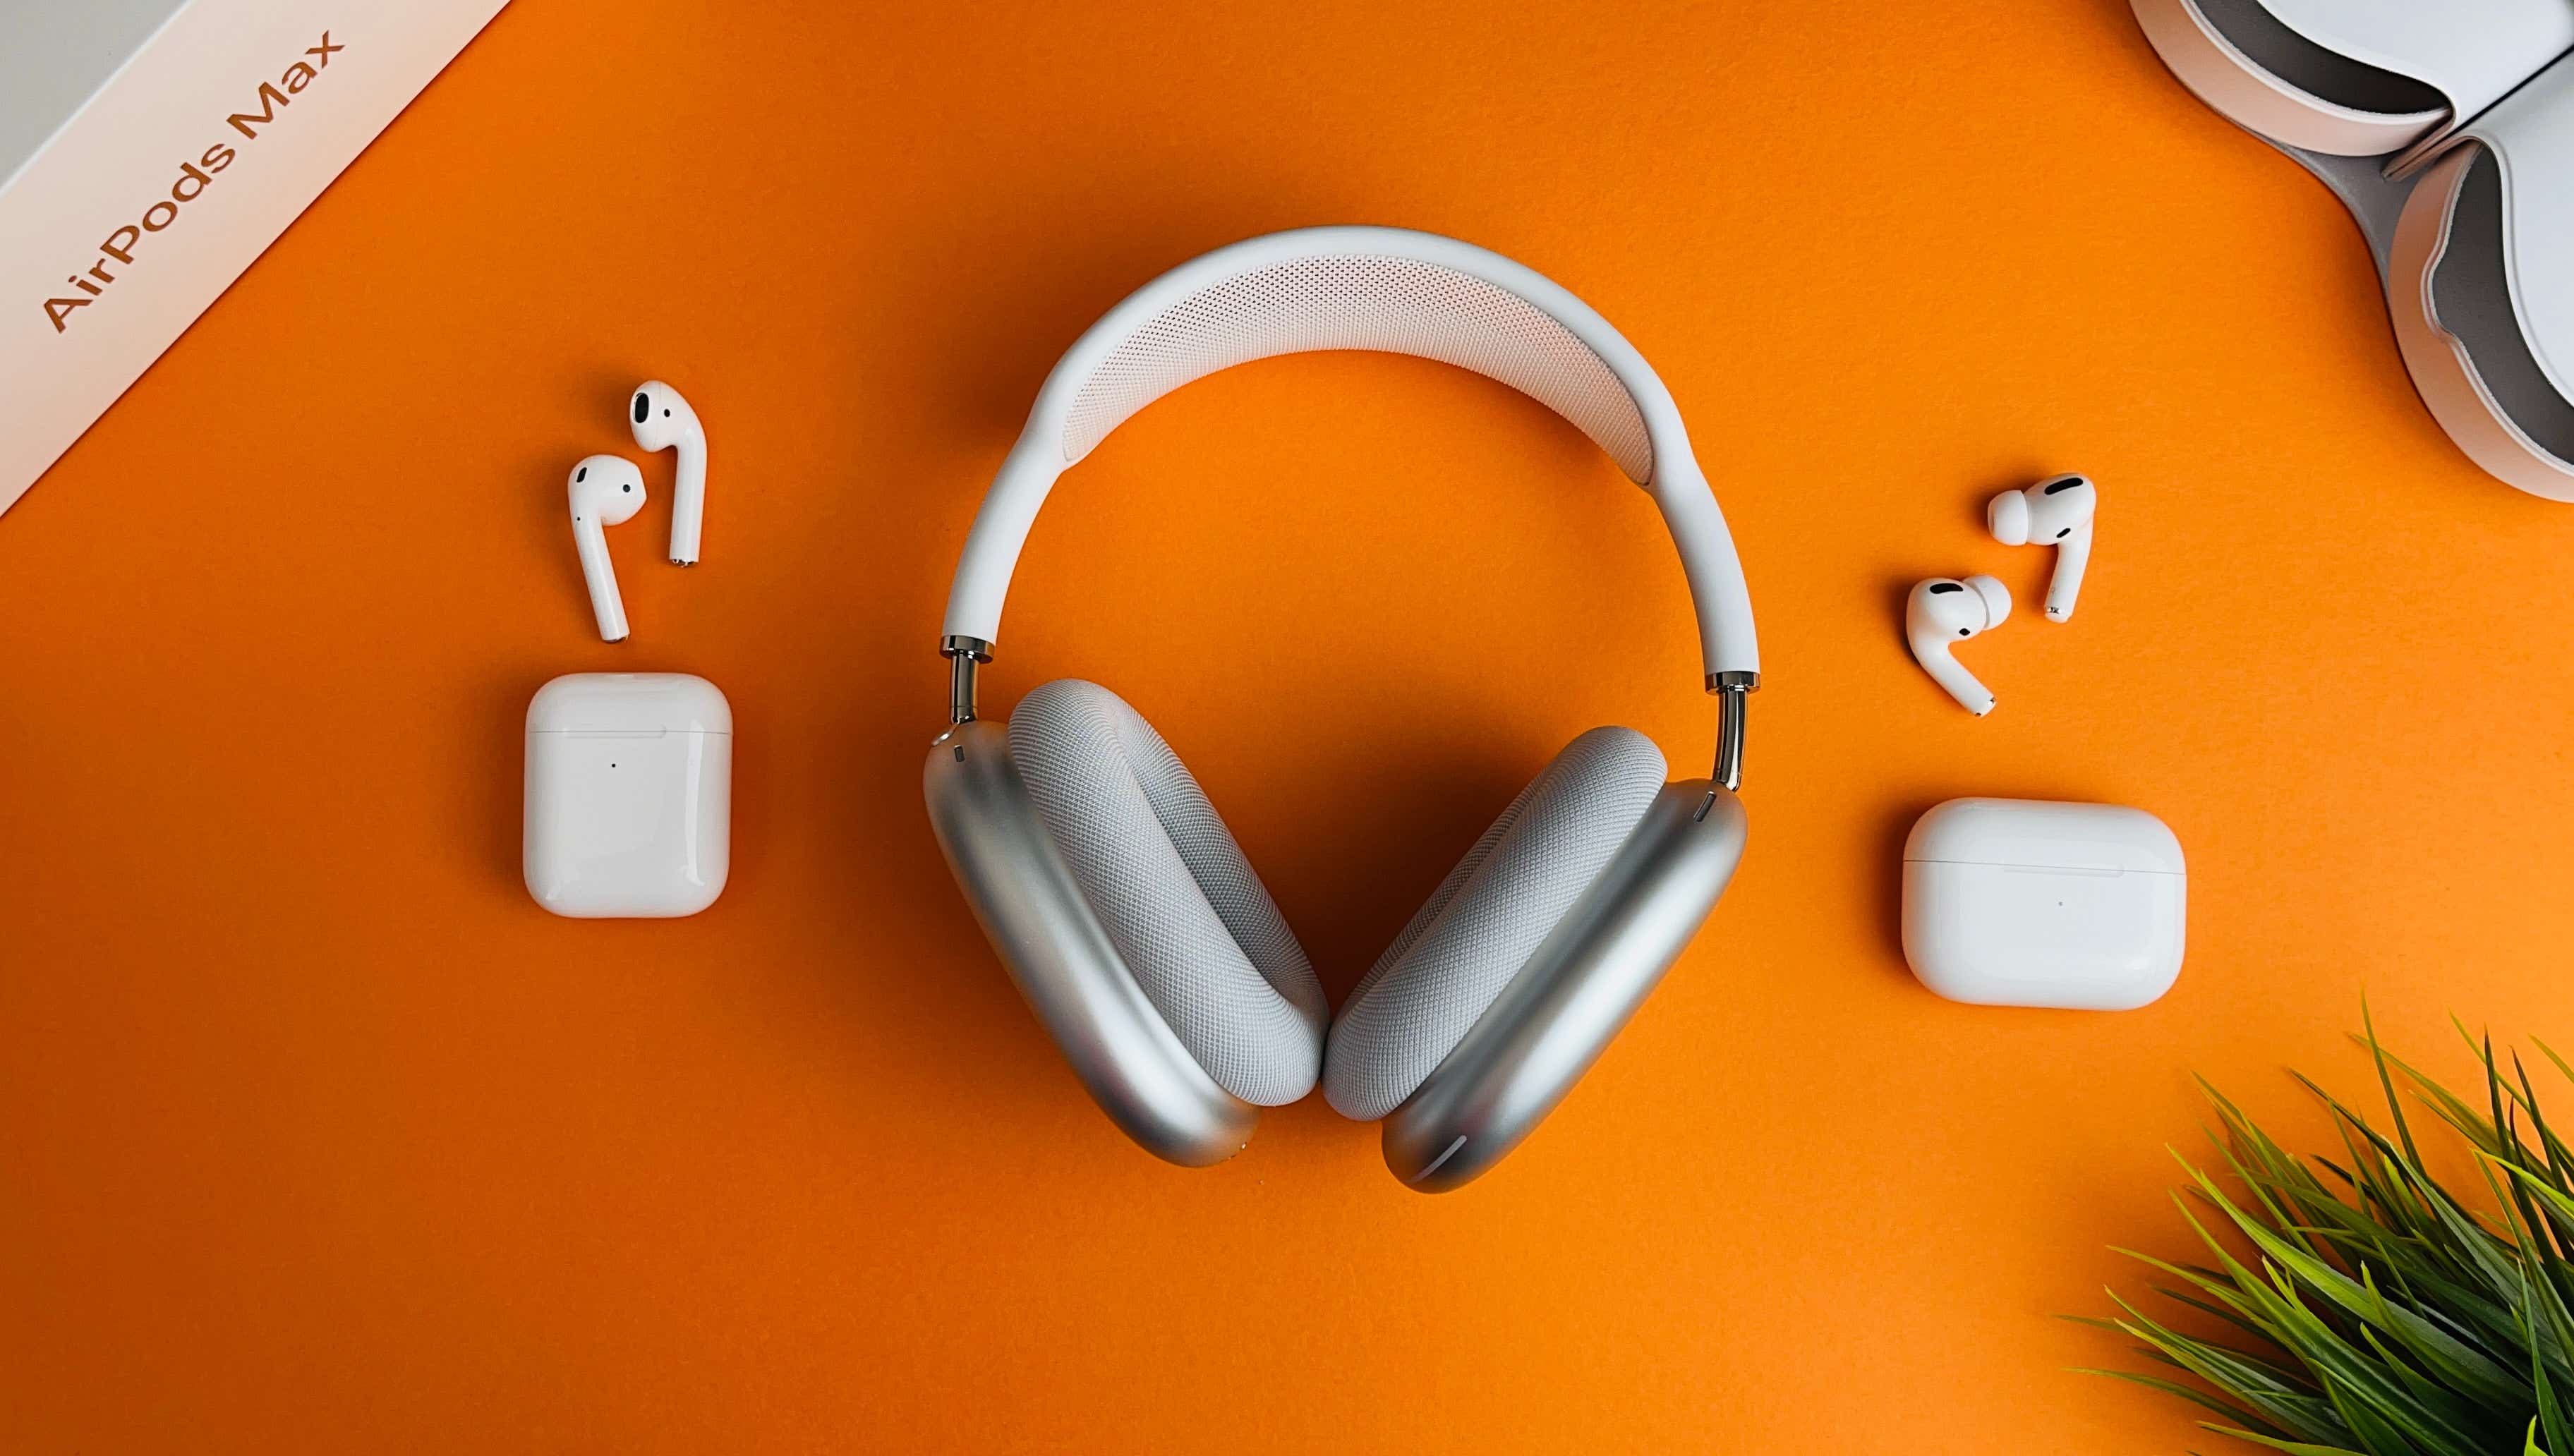 Airpod max and airpods against an orange background